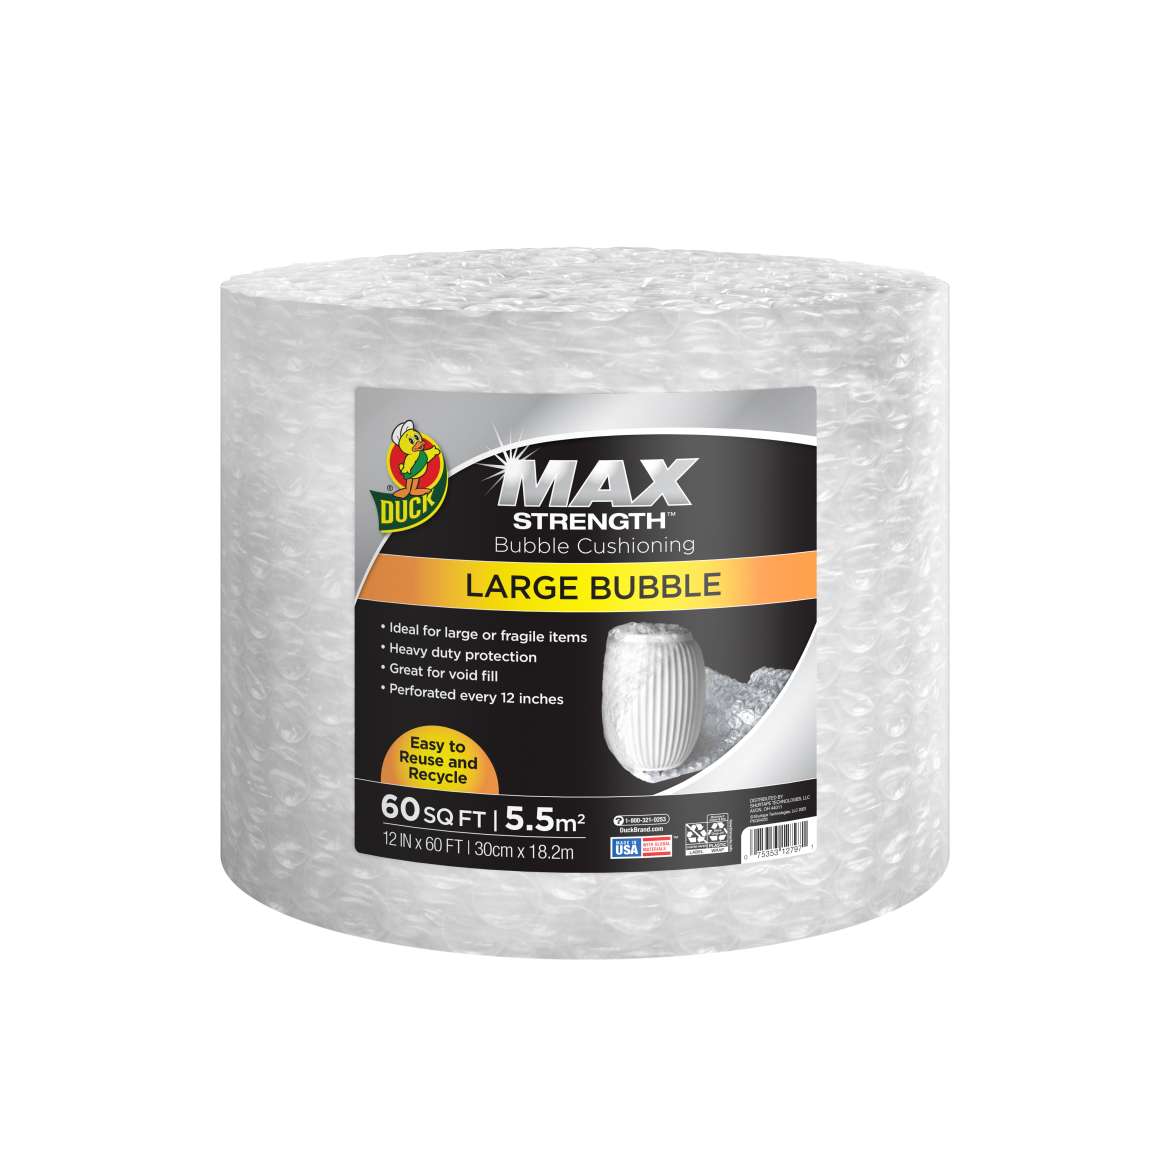 Duck® Max Strength™ Large Bubble Cushioning Wrap Image